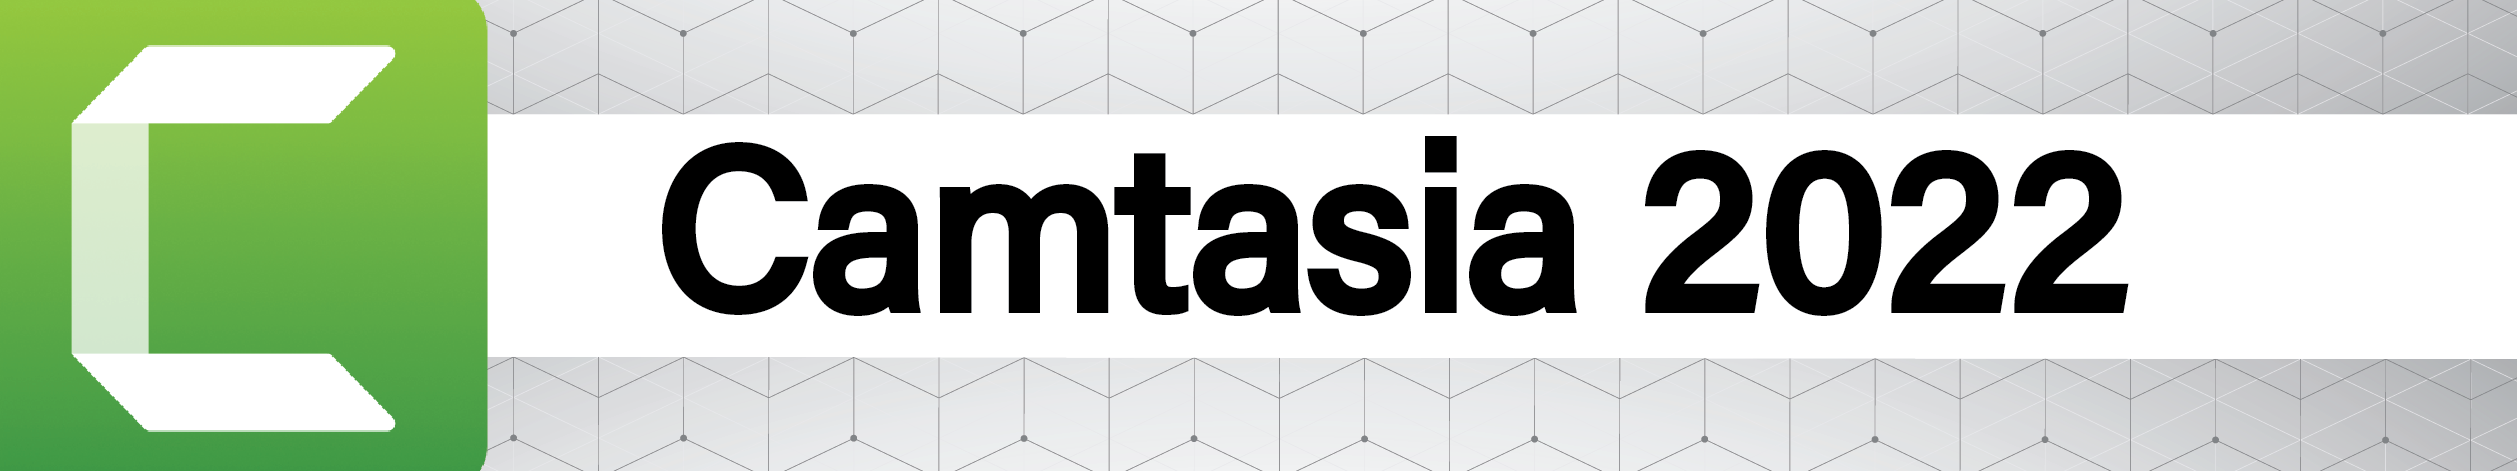 Camtasia 2022 Banner.png